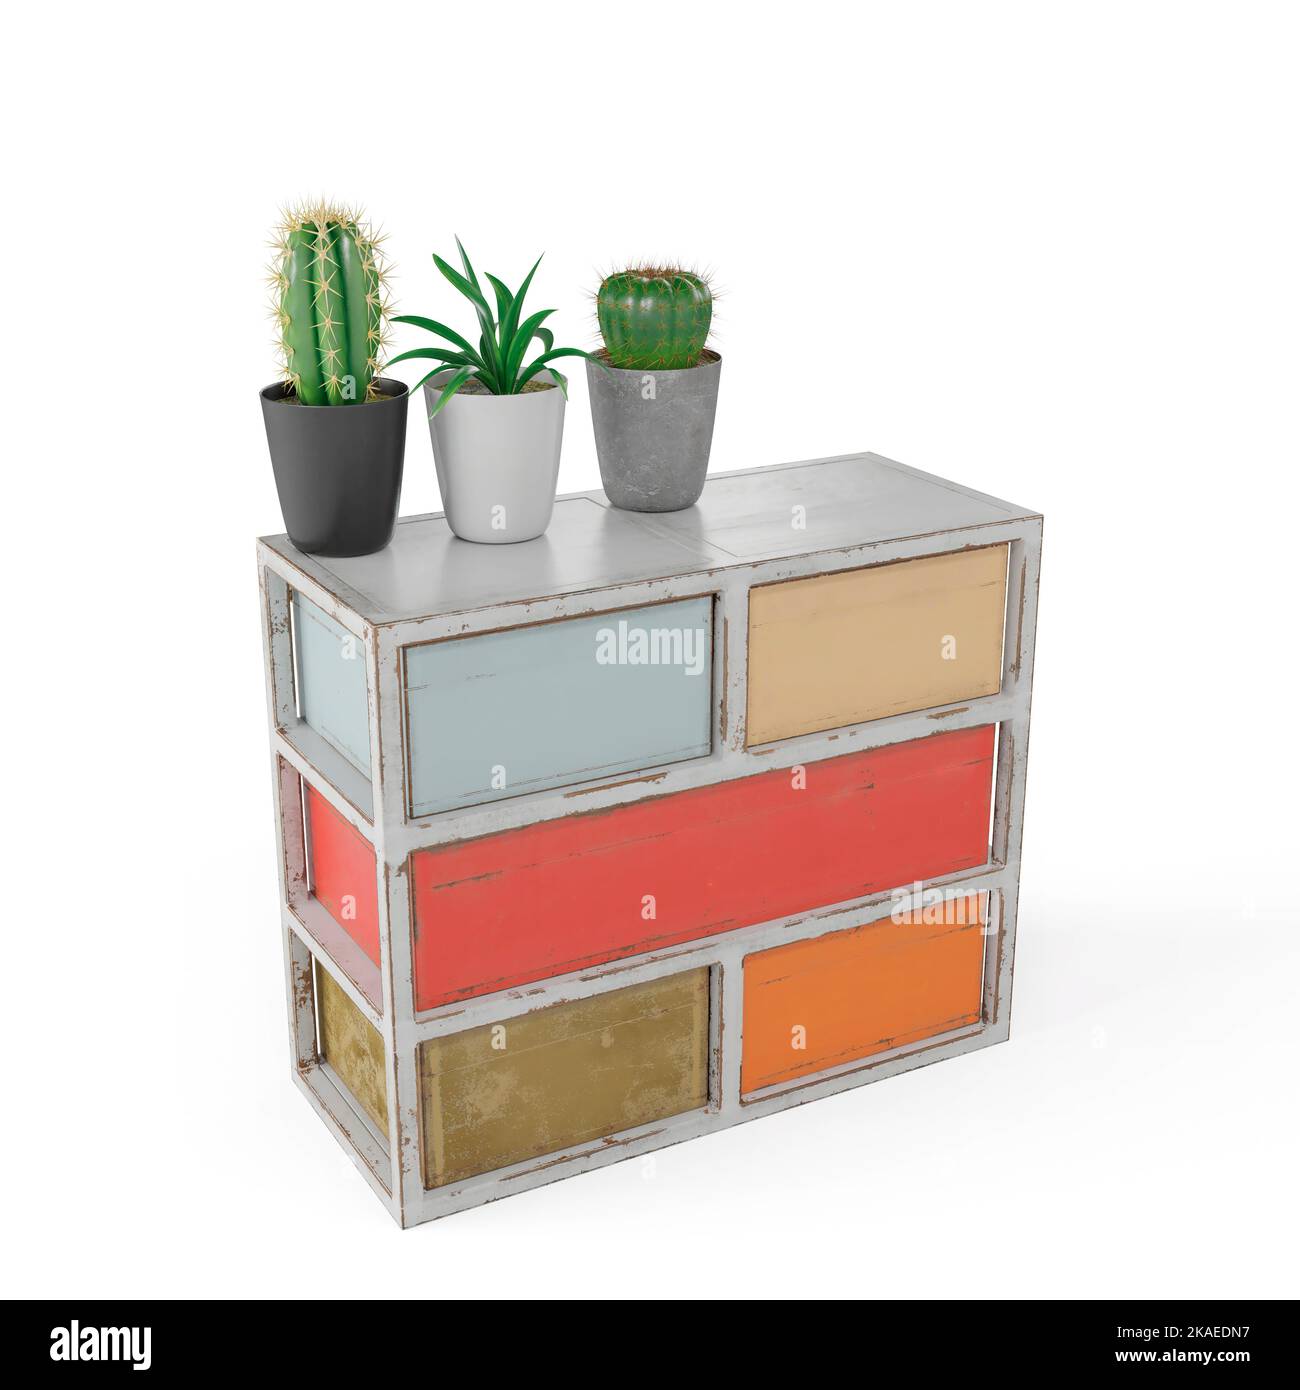 A photorealistic 3D rendering of colorful drawers with cacti in pots decorating them on a white background Stock Photo